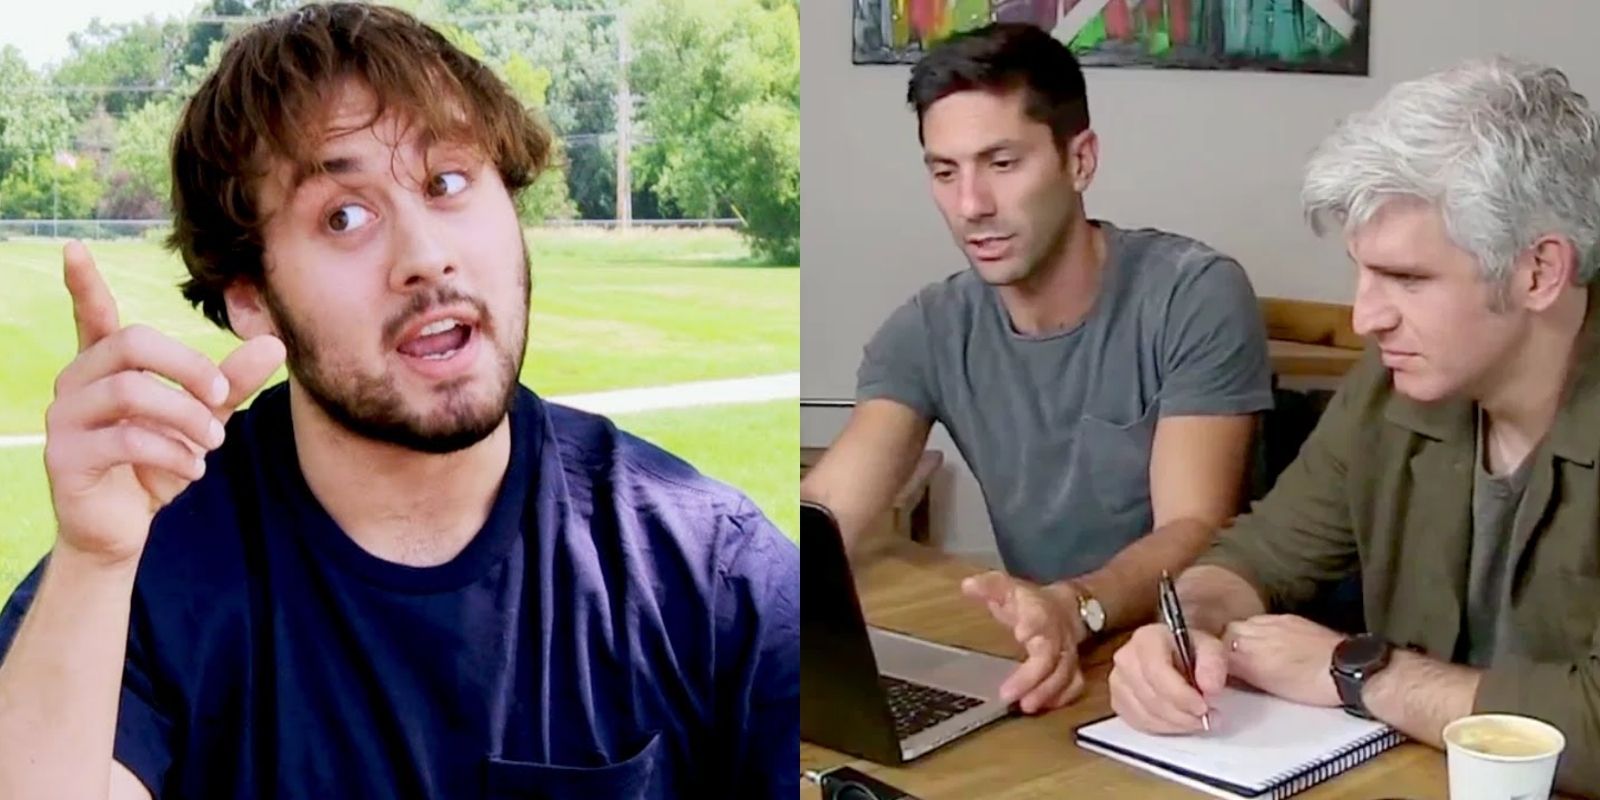 Surprising reveal in episode Artis and Jess (L) and Nev Schulman and Max Joseph mid investigation (R) in MTV Catfish